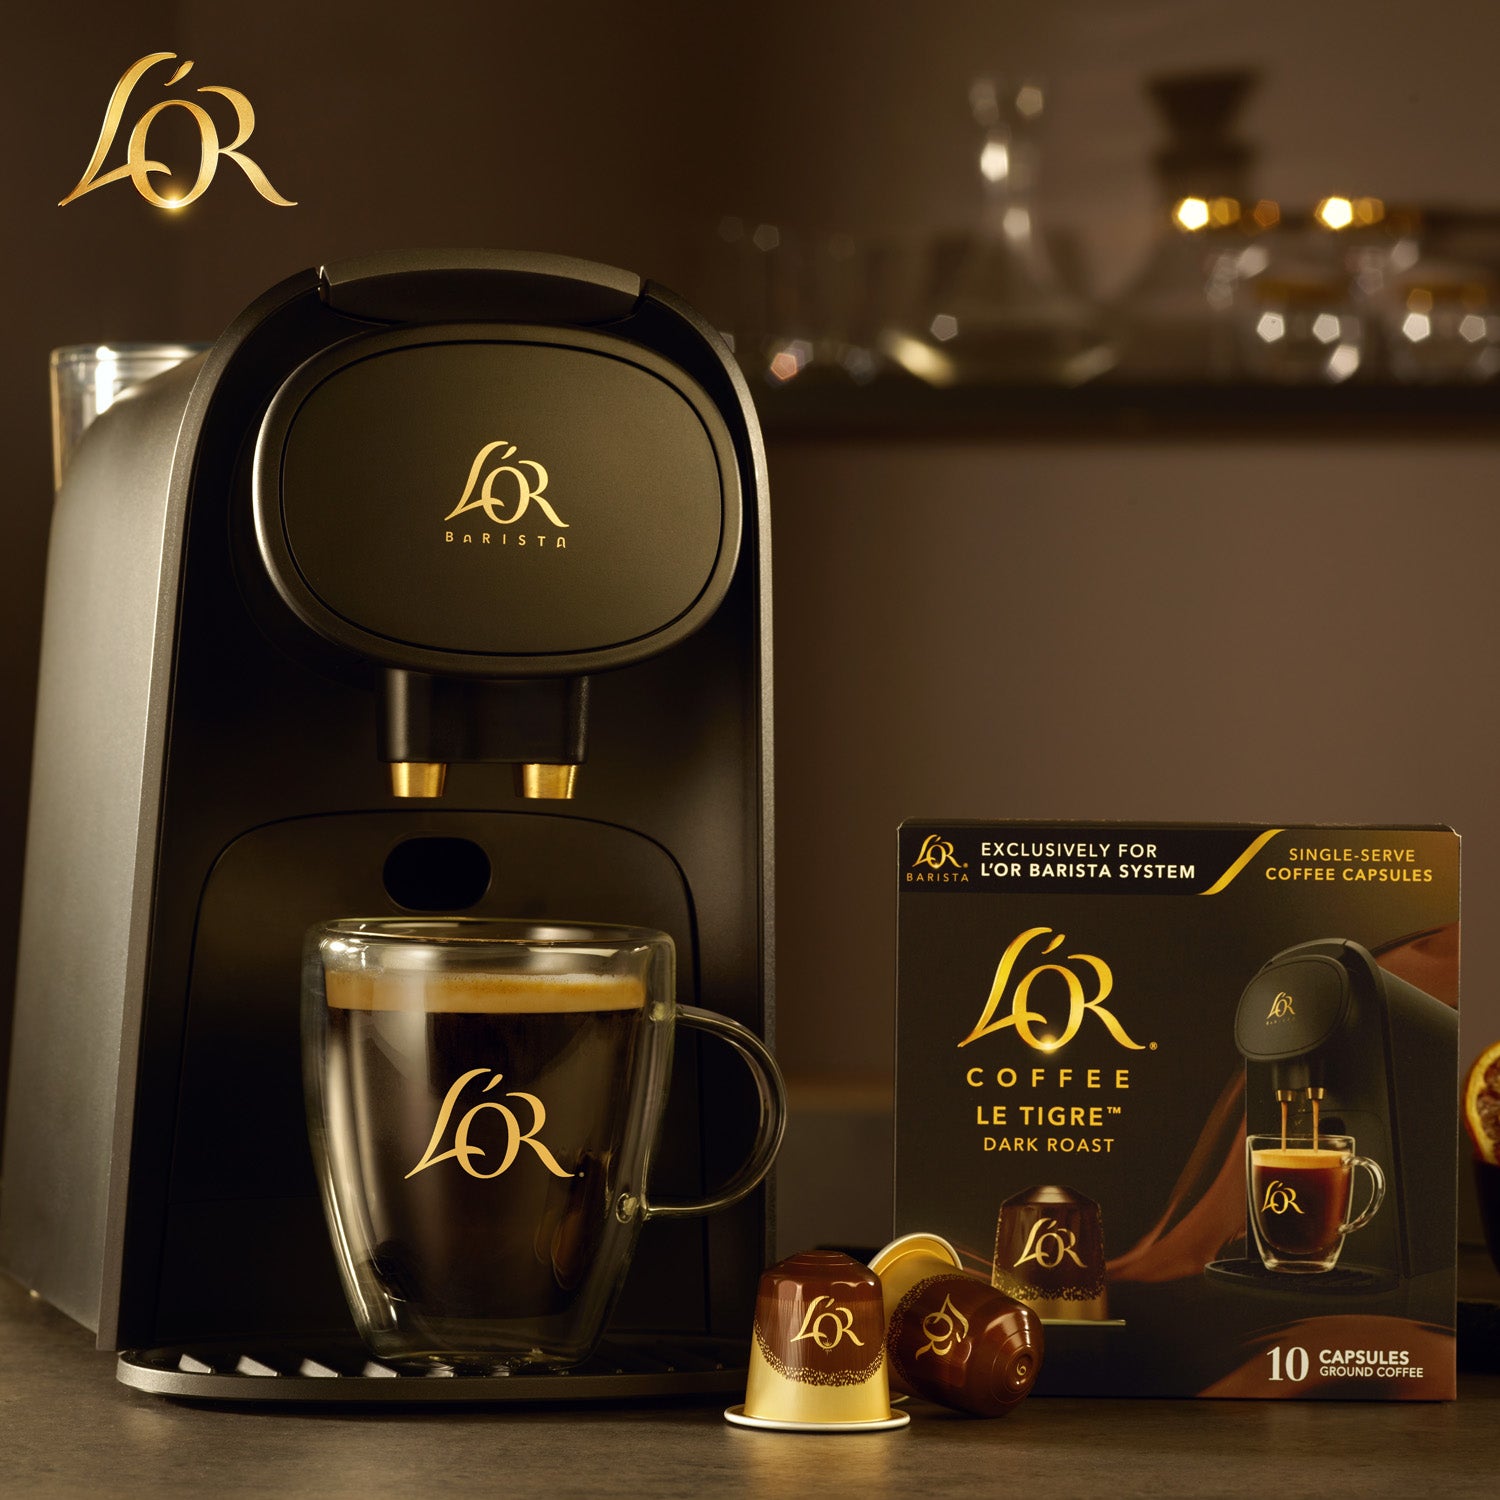 Image of L'OR BARISTA System with Le Tigre Coffee.